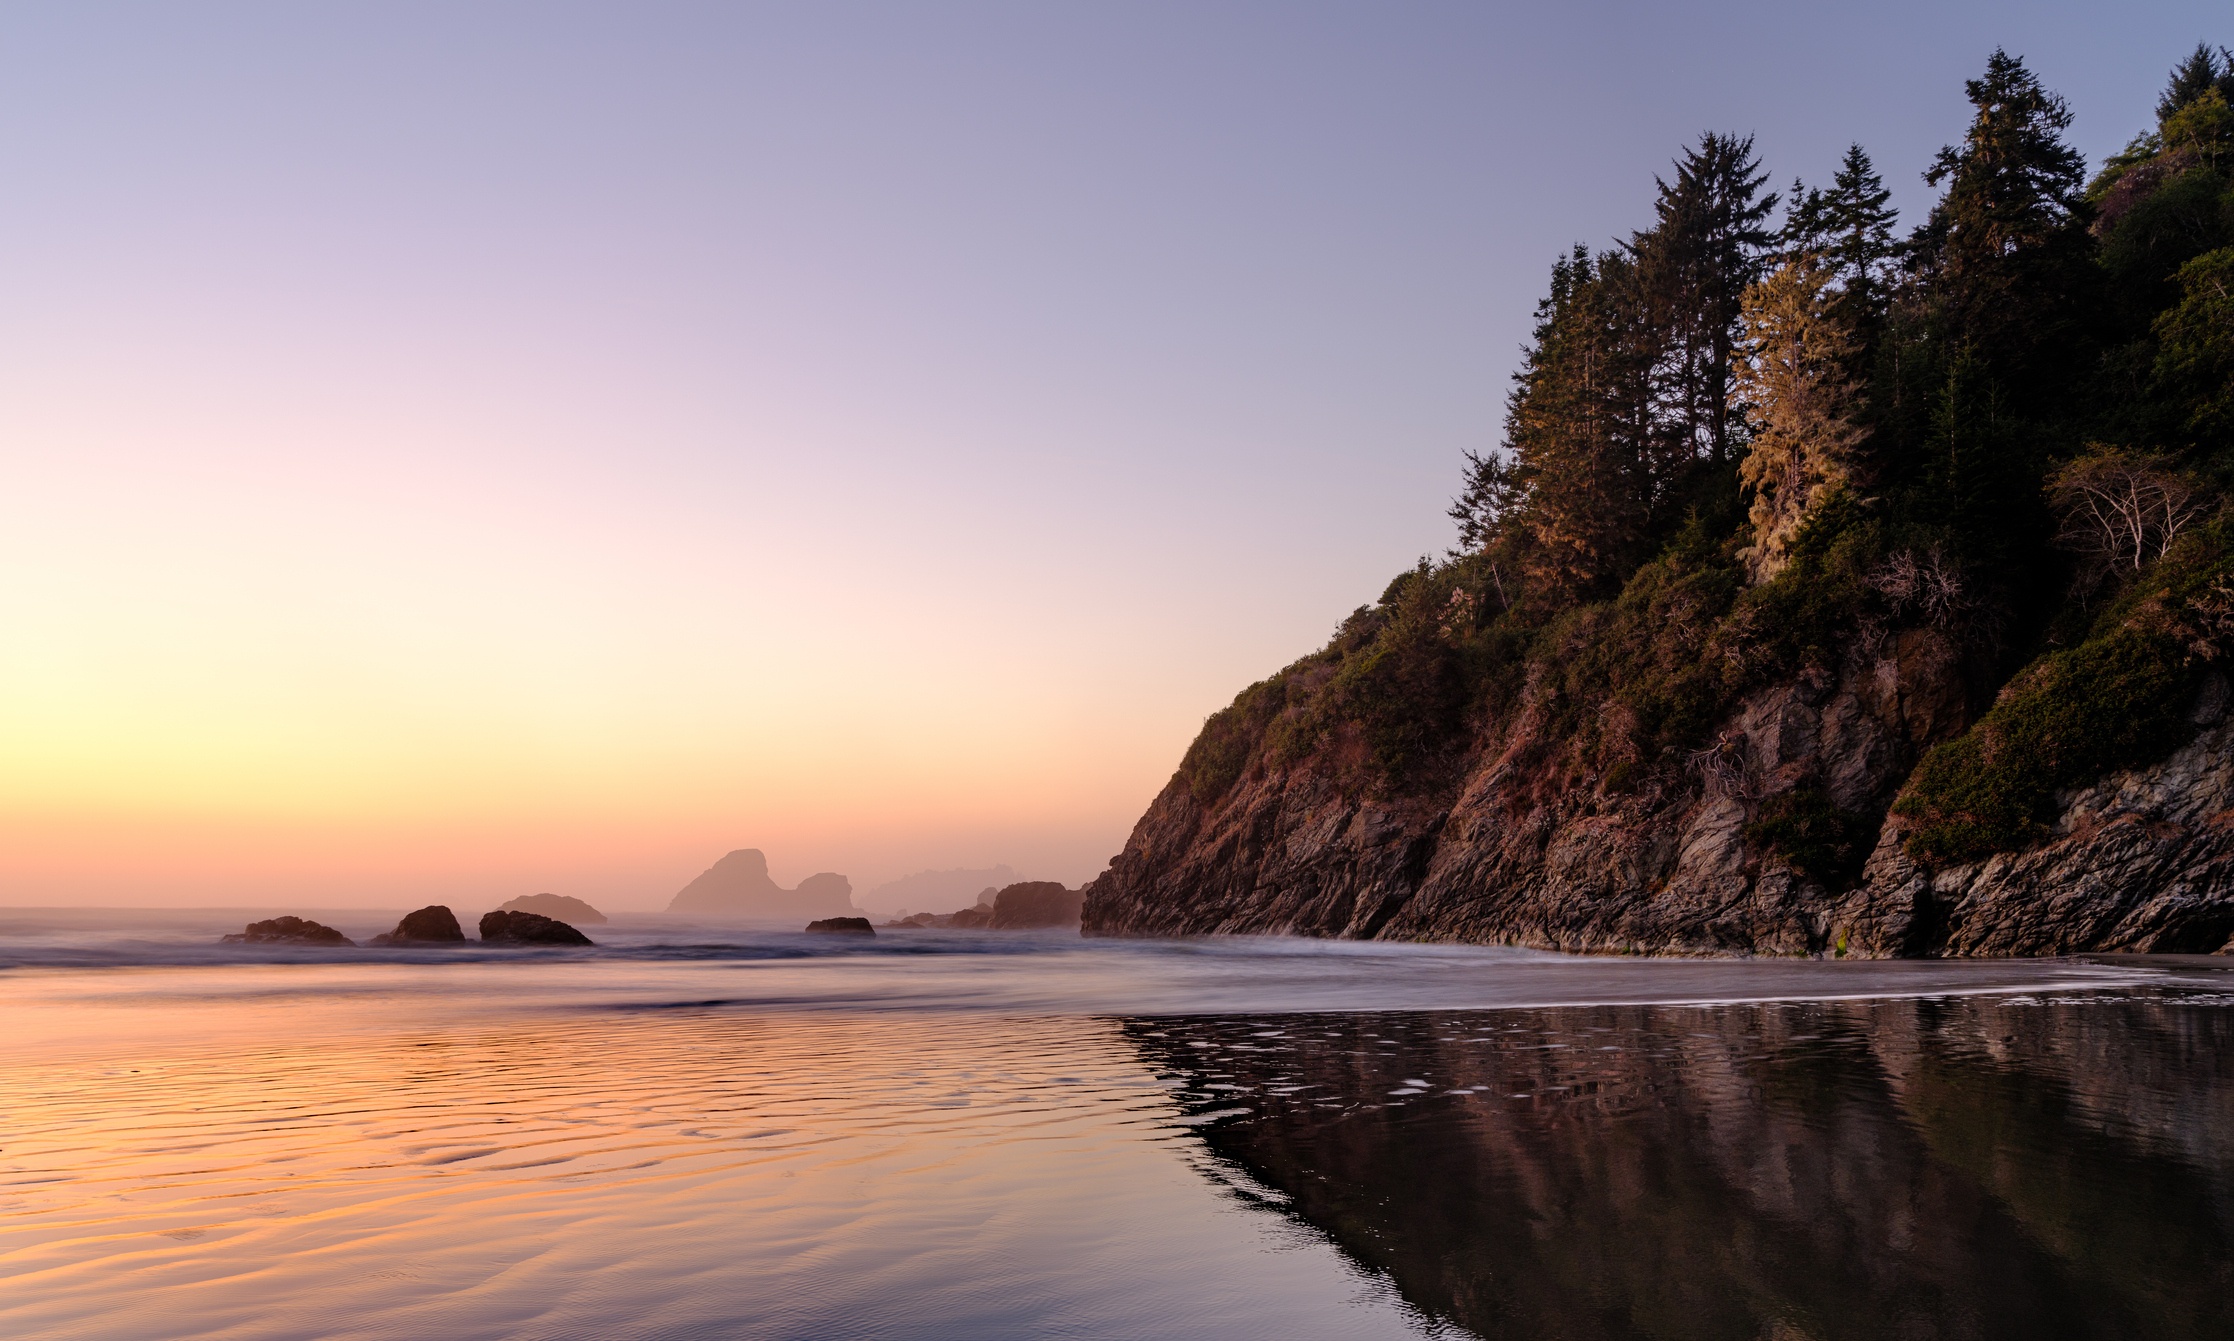 Serenity at the beach with waves gently touching the shore, surrounded by cliffs and trees at twilight